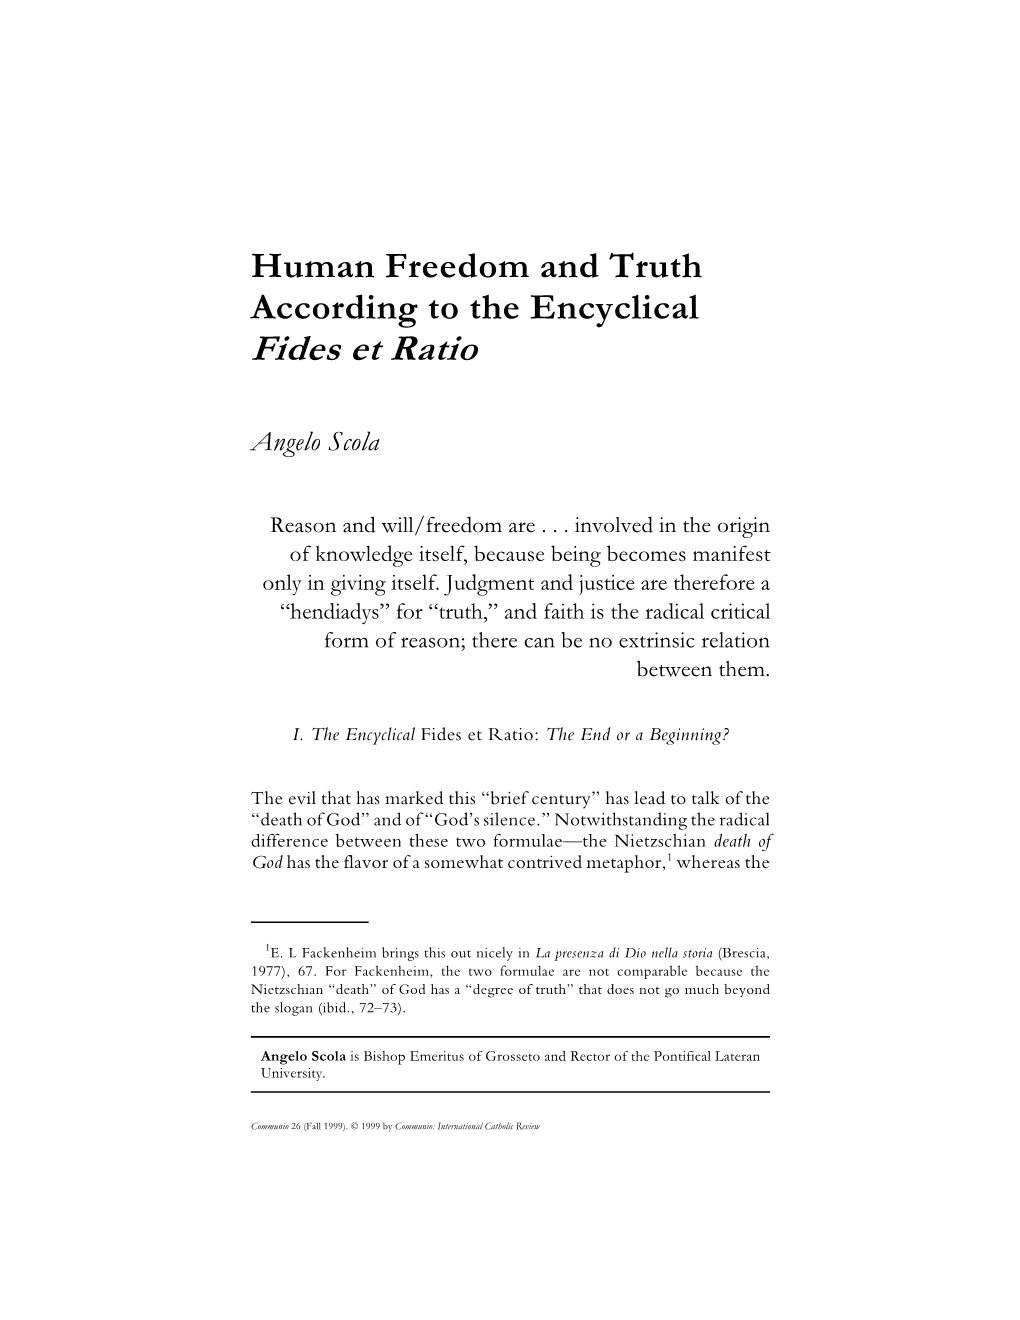 Human Freedom and Truth According to the Encyclical Fides Et Ratio